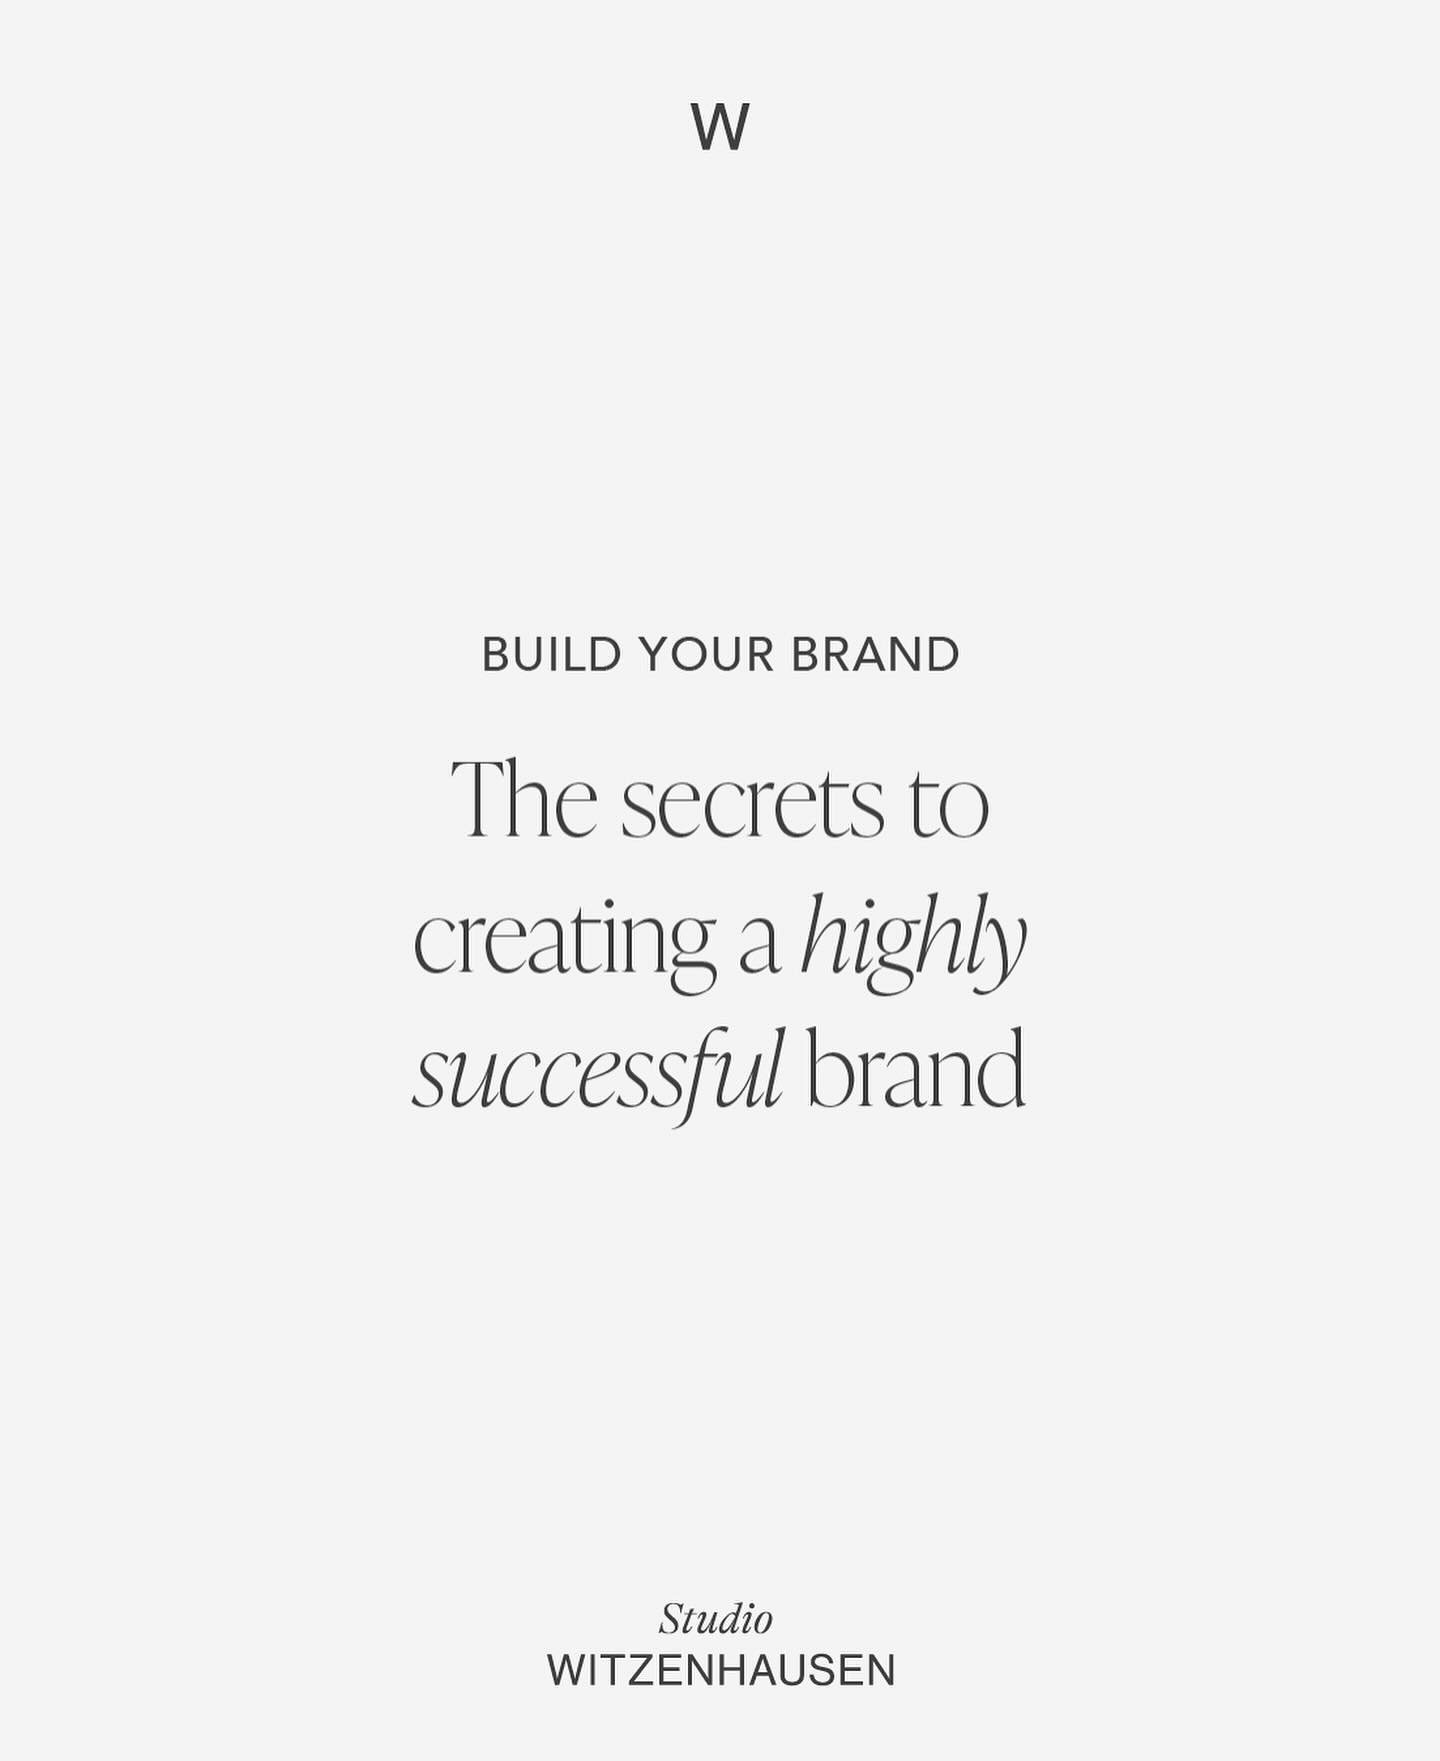 Creating a highly successful brand involves a combination of strategy, creativity, and consistency. Swipe to the left to see the five key secrets.